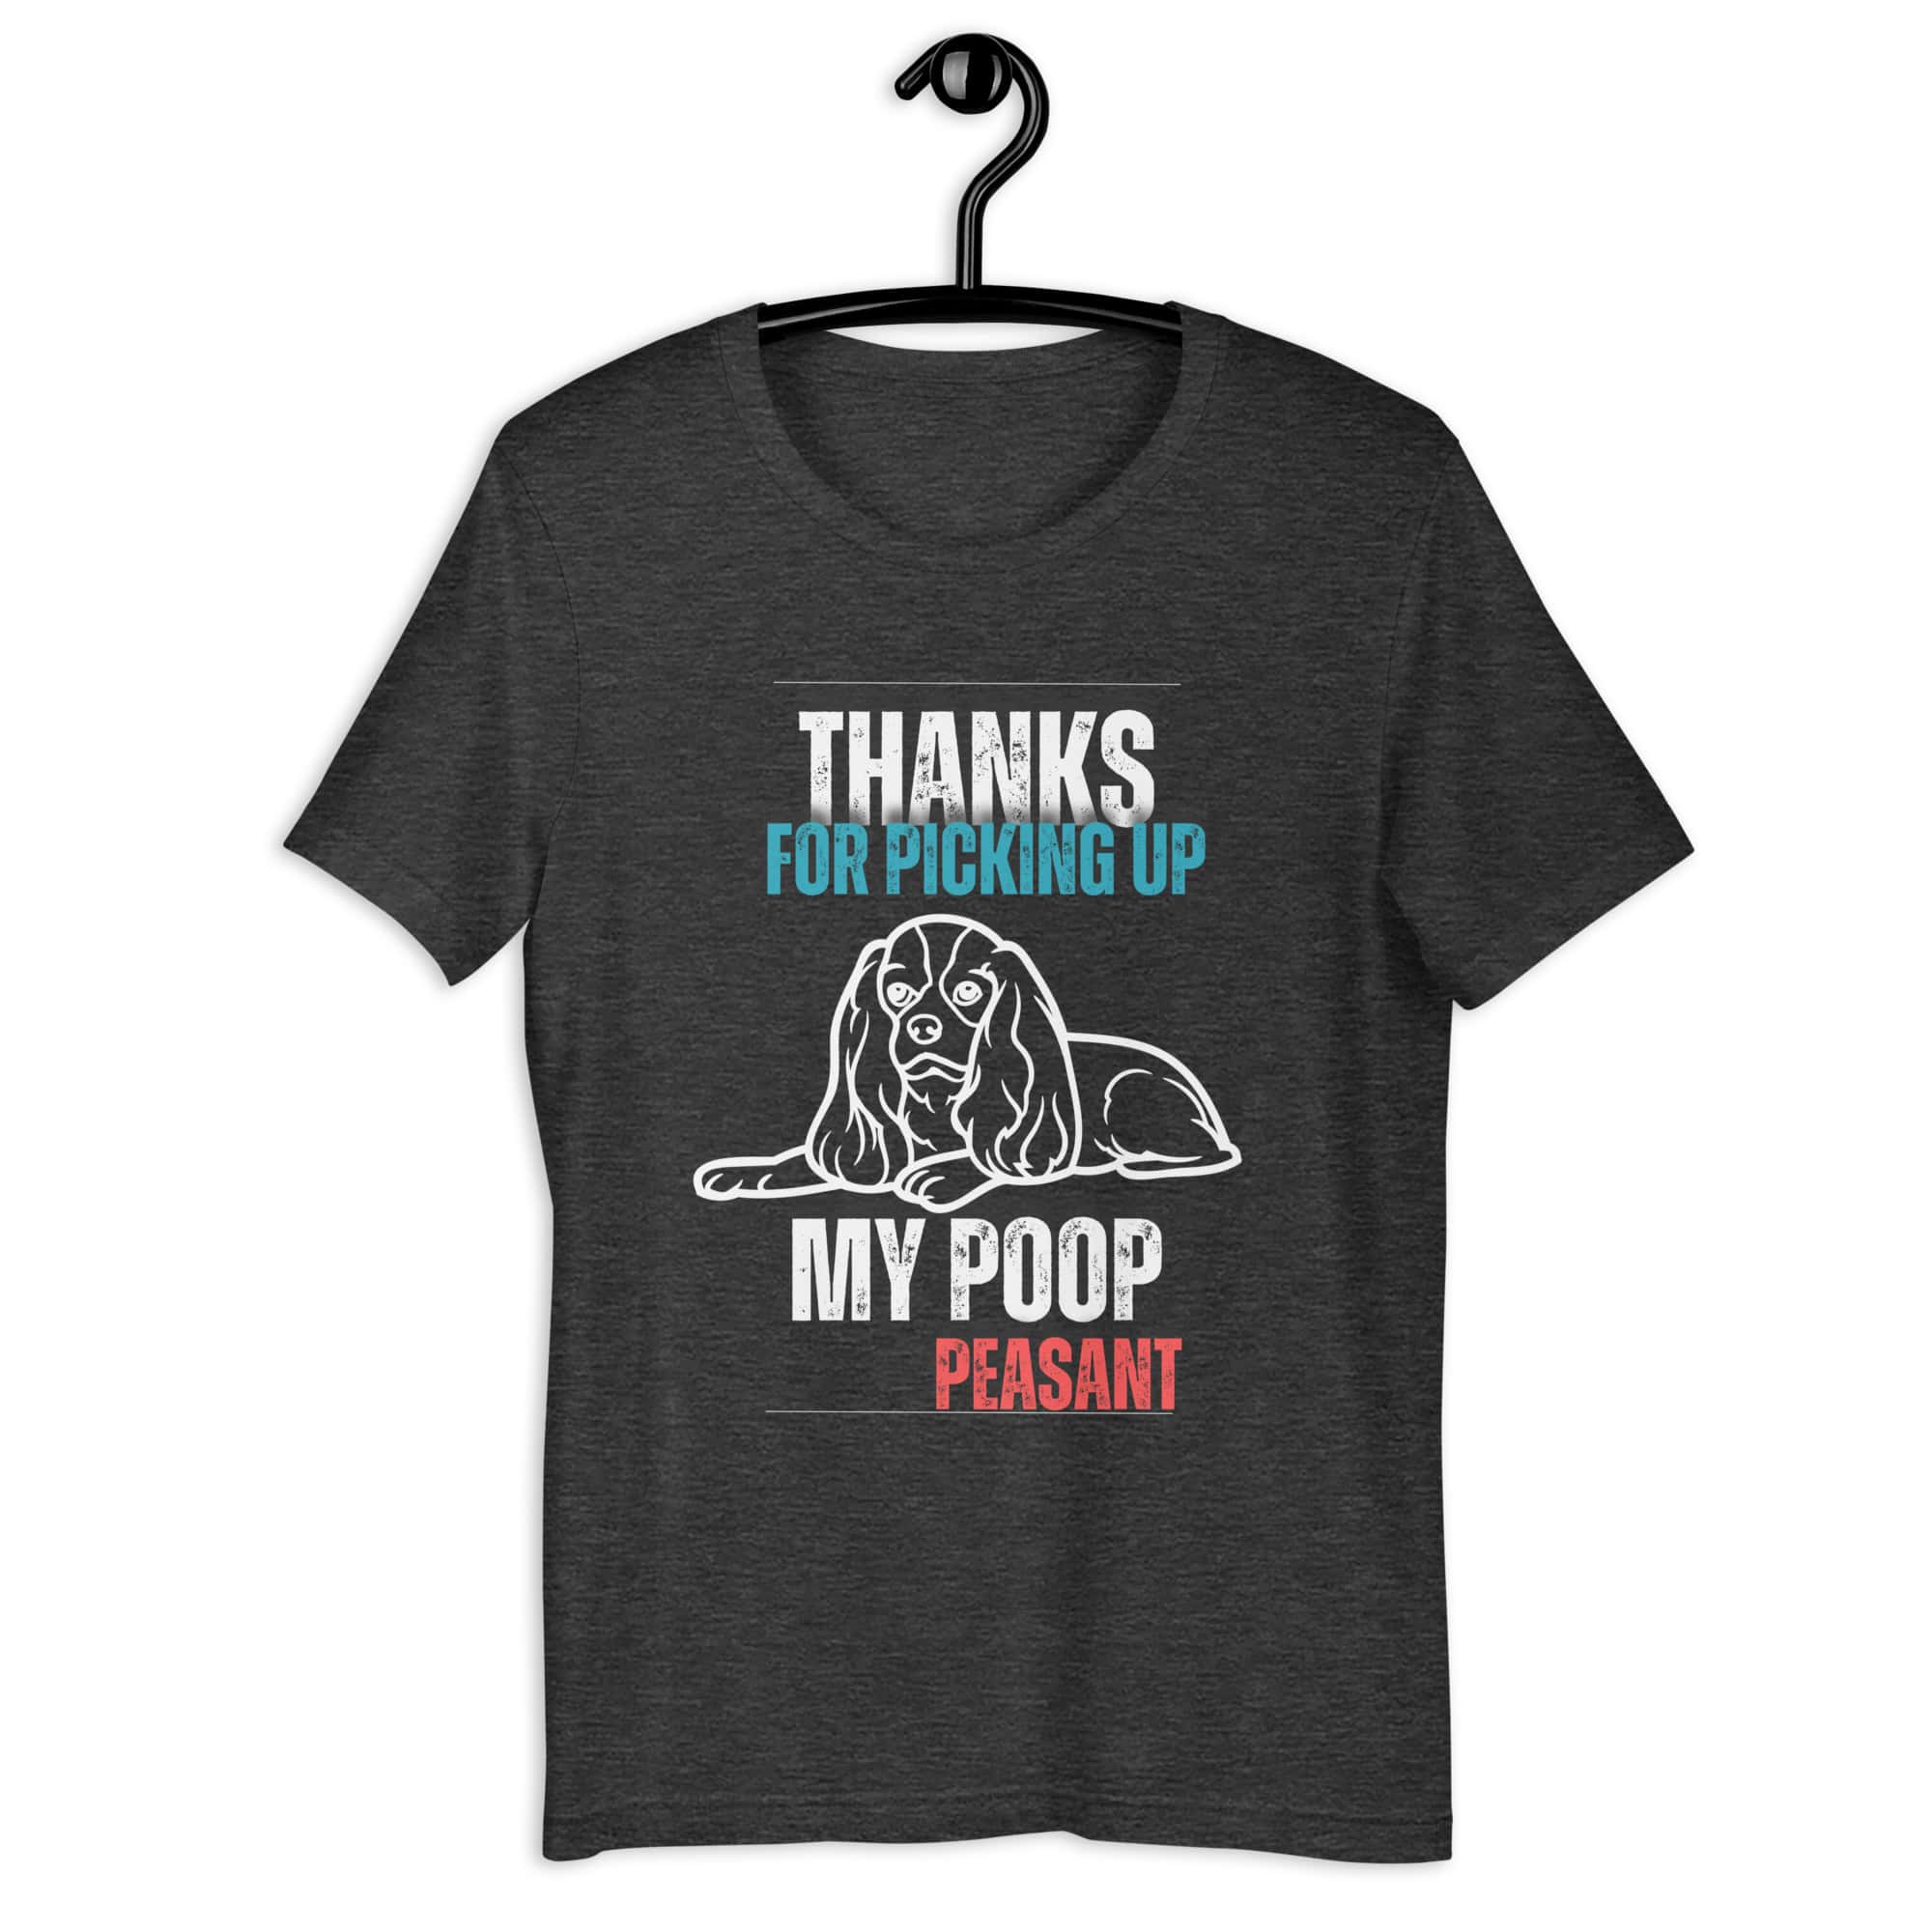 Thanks For Picking Up My POOP Funny Hounds Unisex T-Shirt. Dark Grey HEather